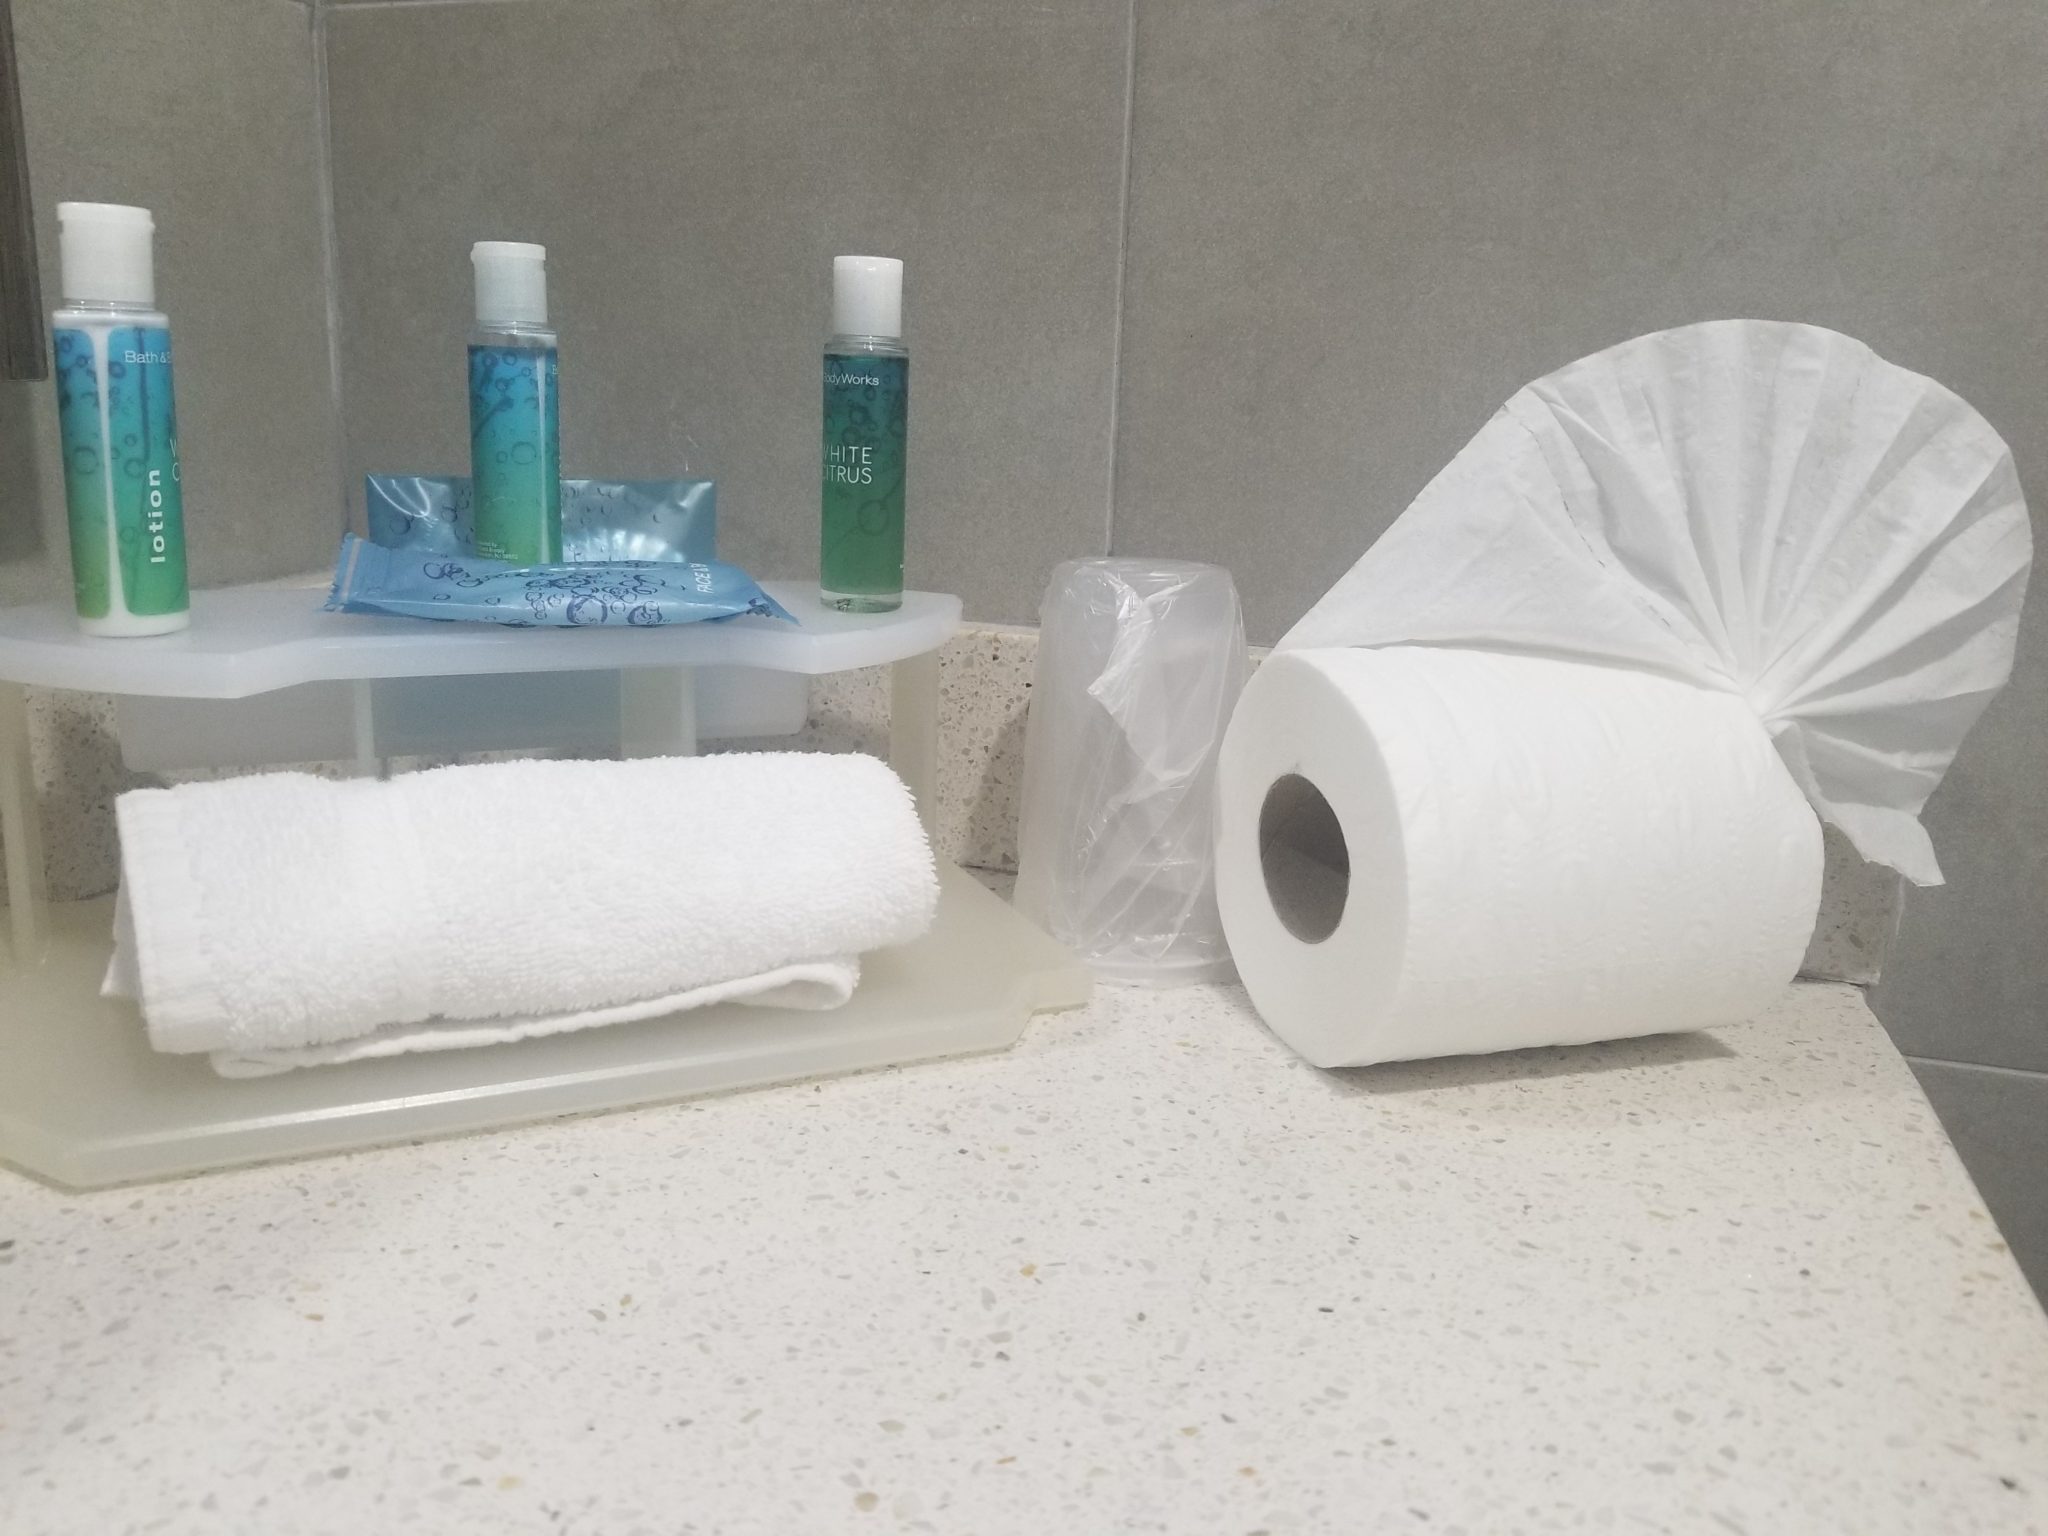 a group of toilet paper rolls and hand sanitizer